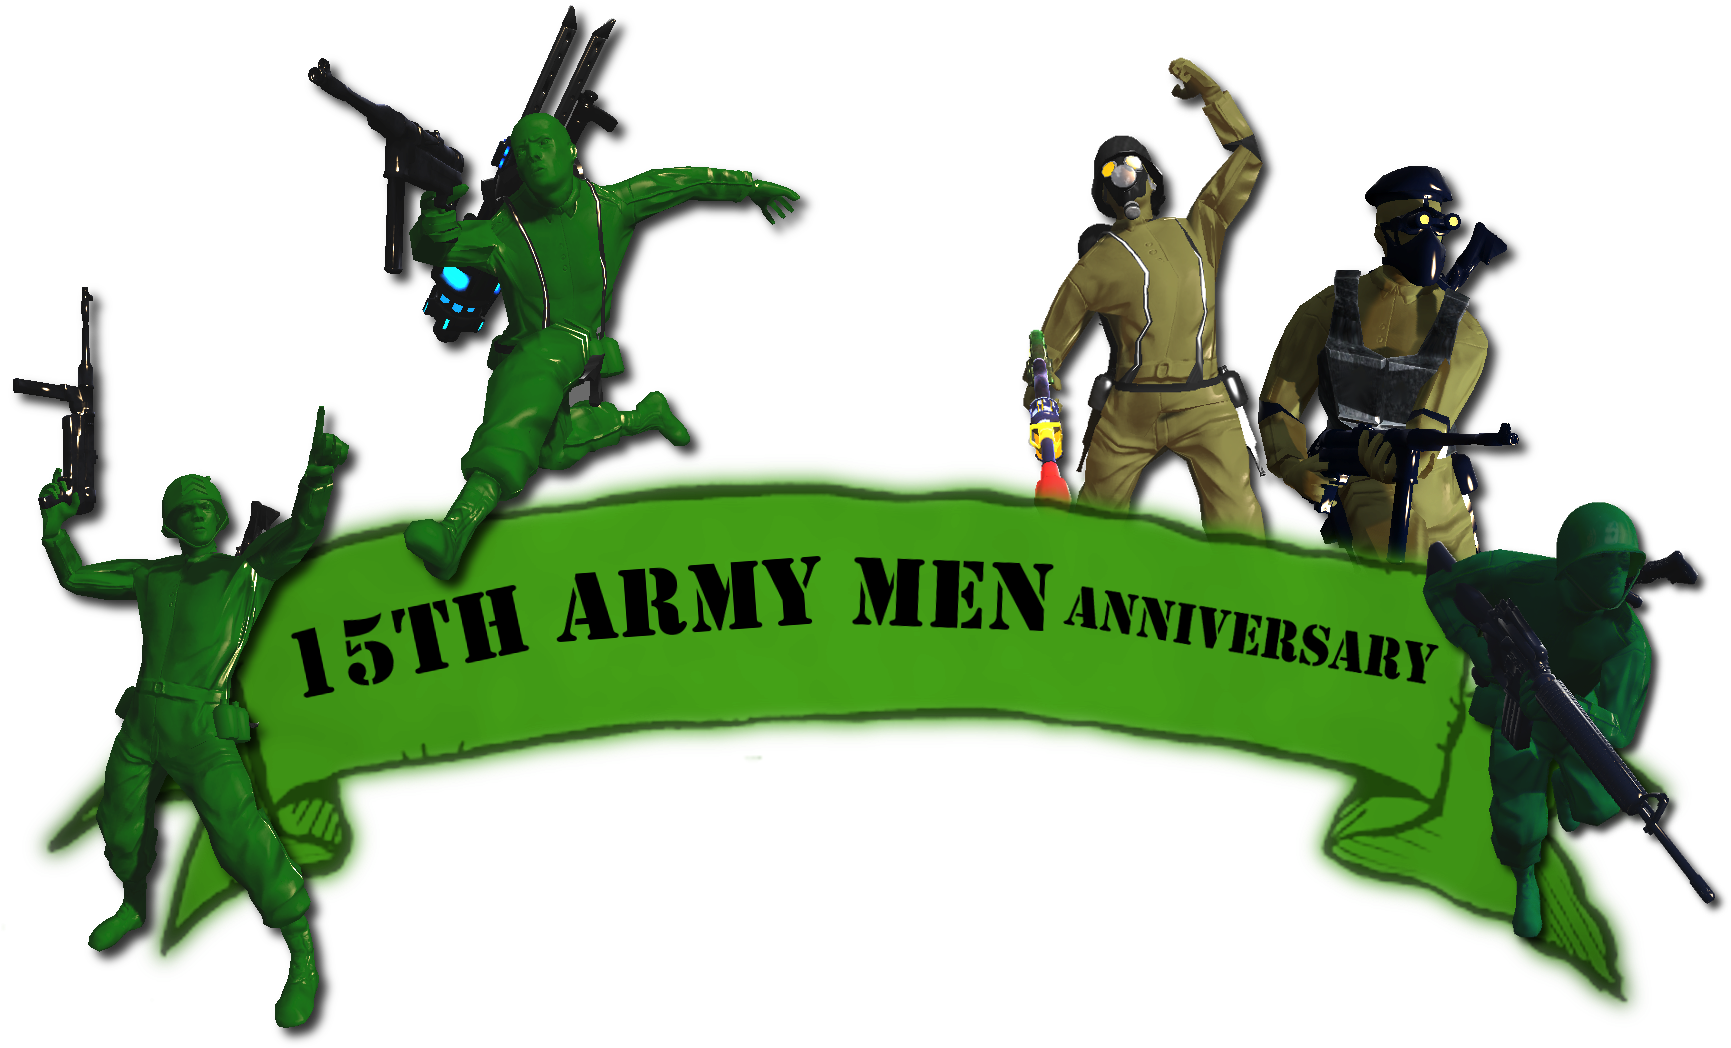 Download 15th Anniversary Of Army Men - Army PNG Image with No Background -  